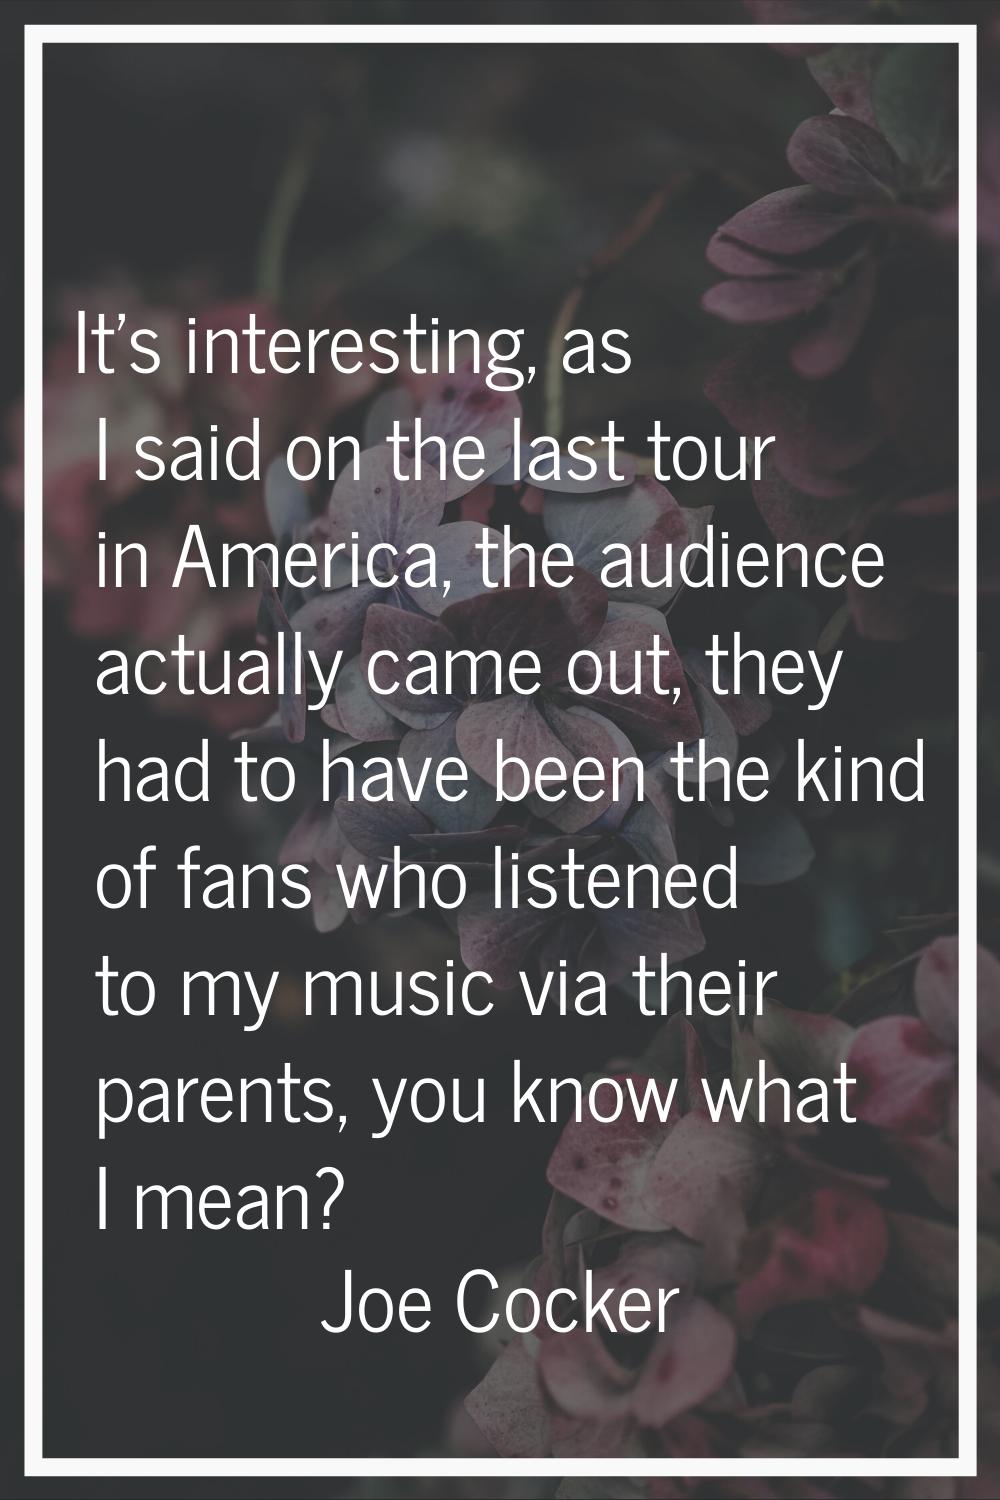 It's interesting, as I said on the last tour in America, the audience actually came out, they had t